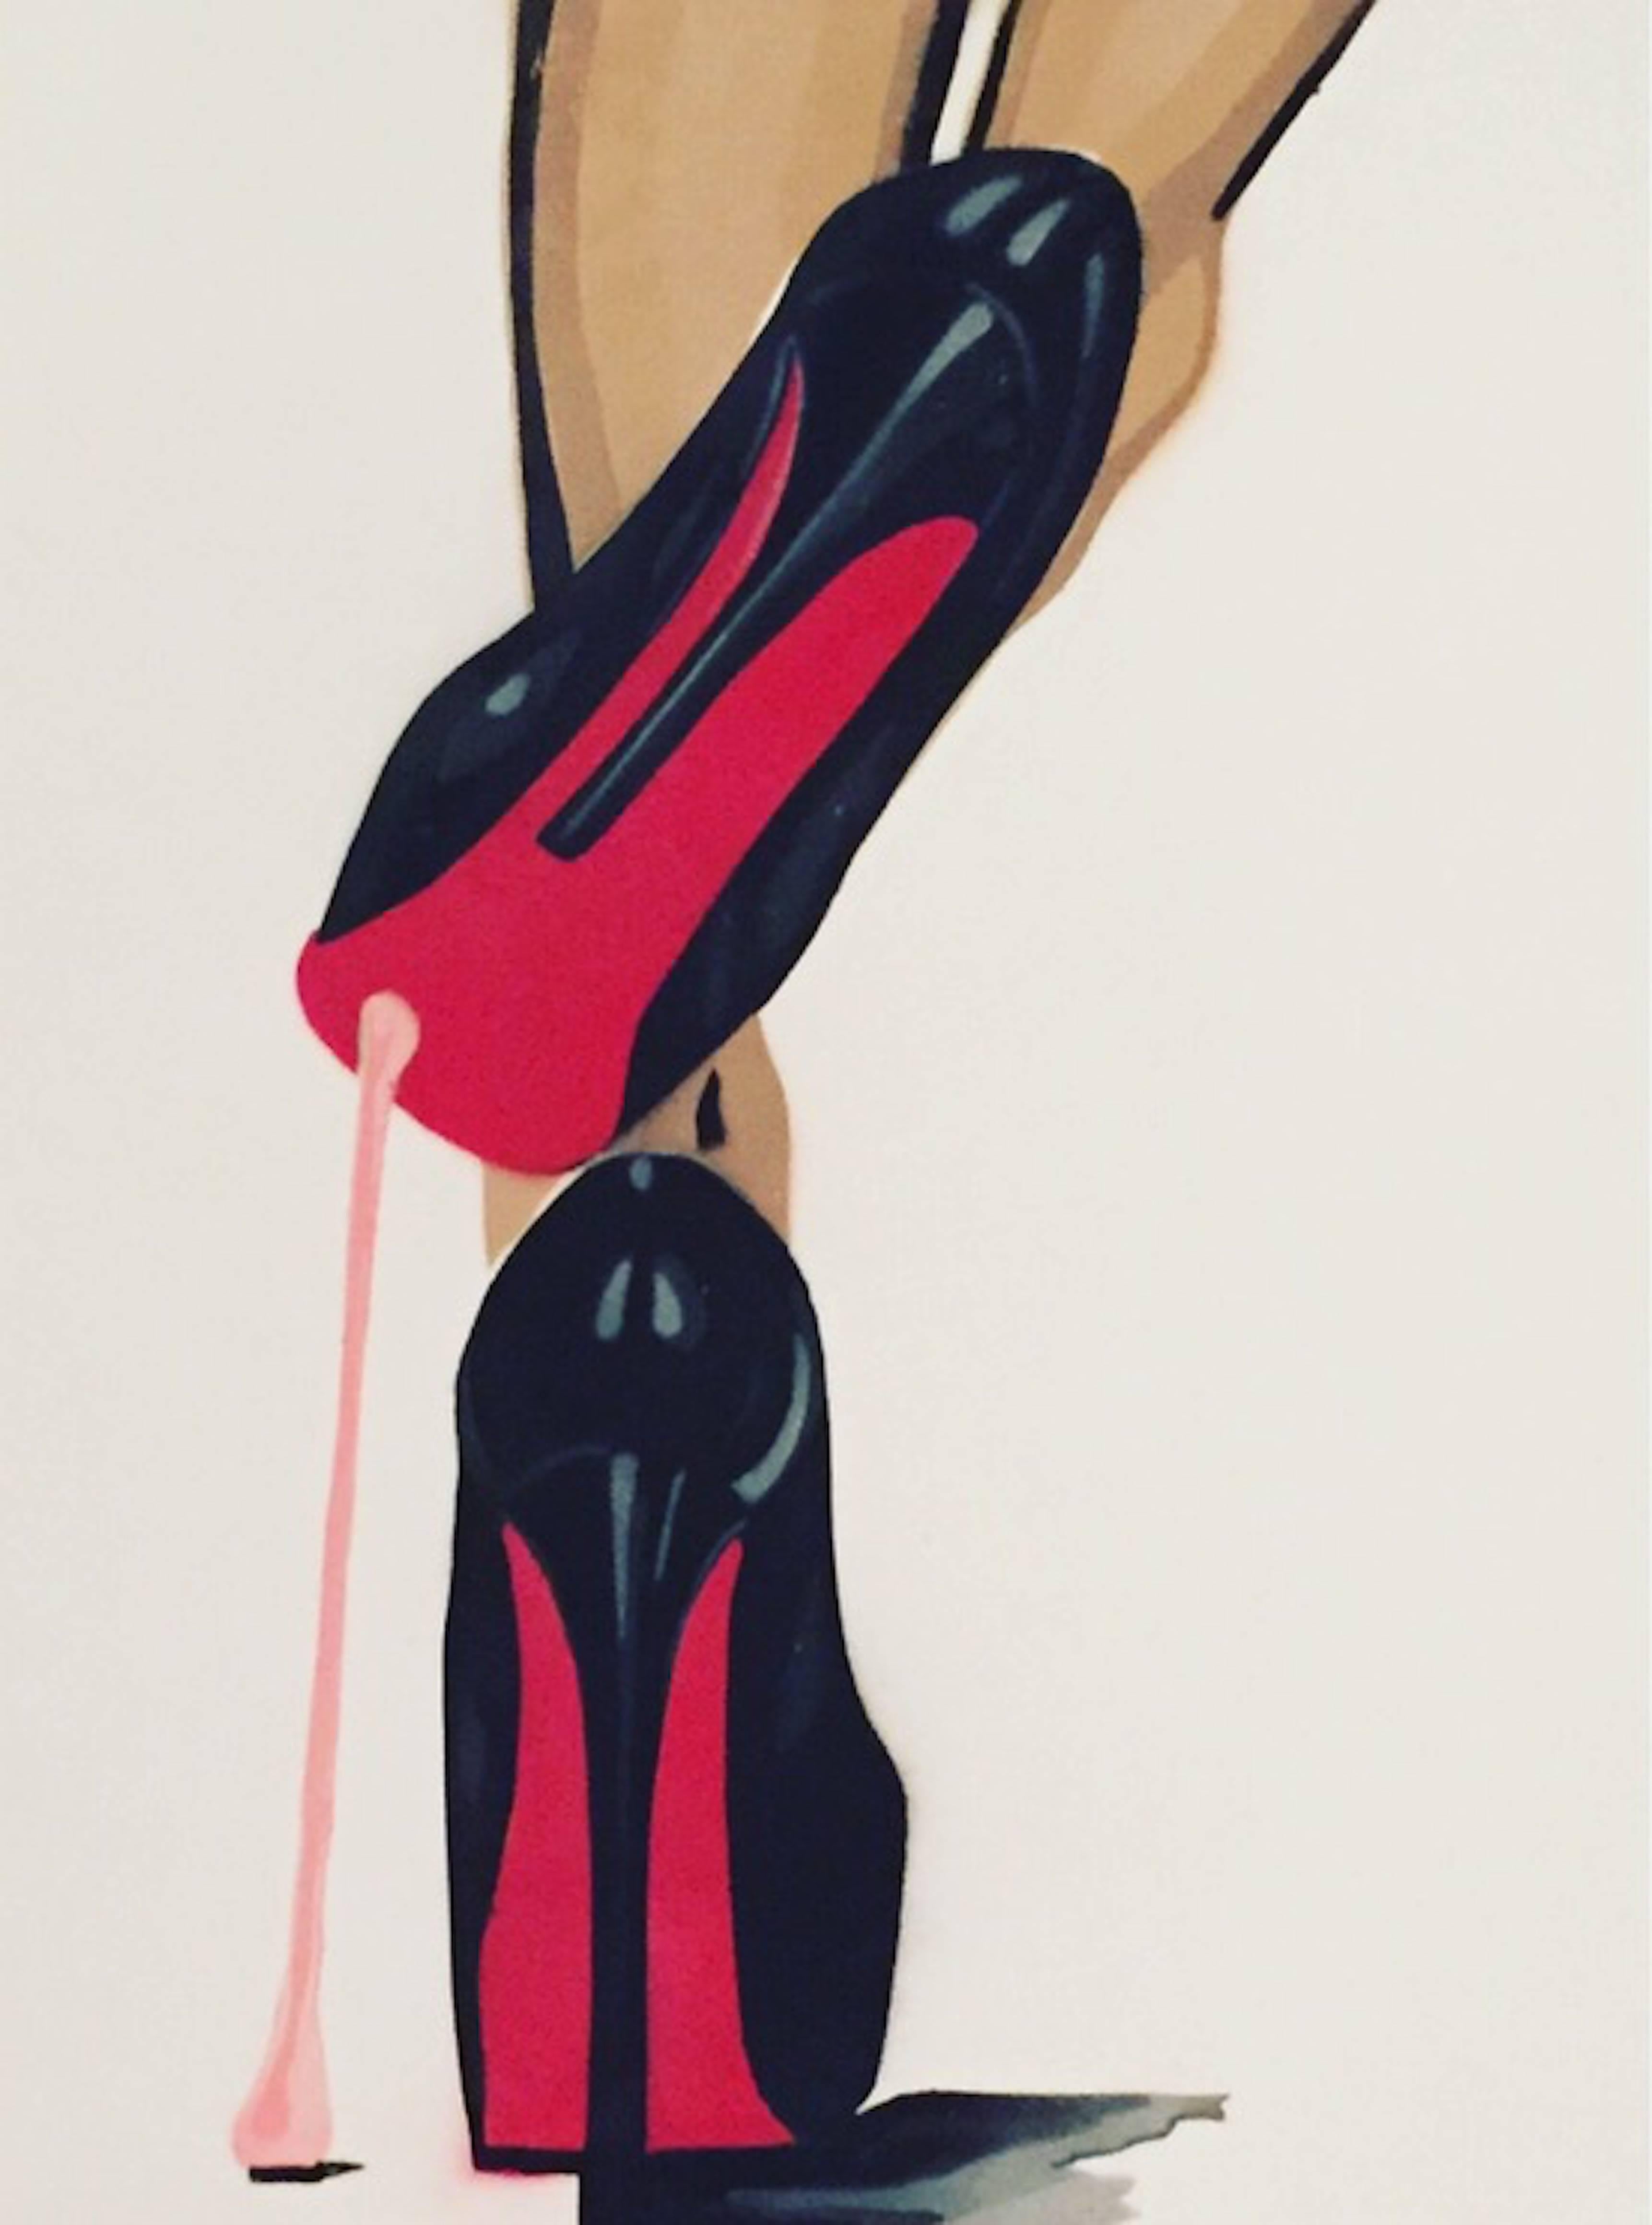 Red Bottom Sole Gumshoe - Painting by Angela China